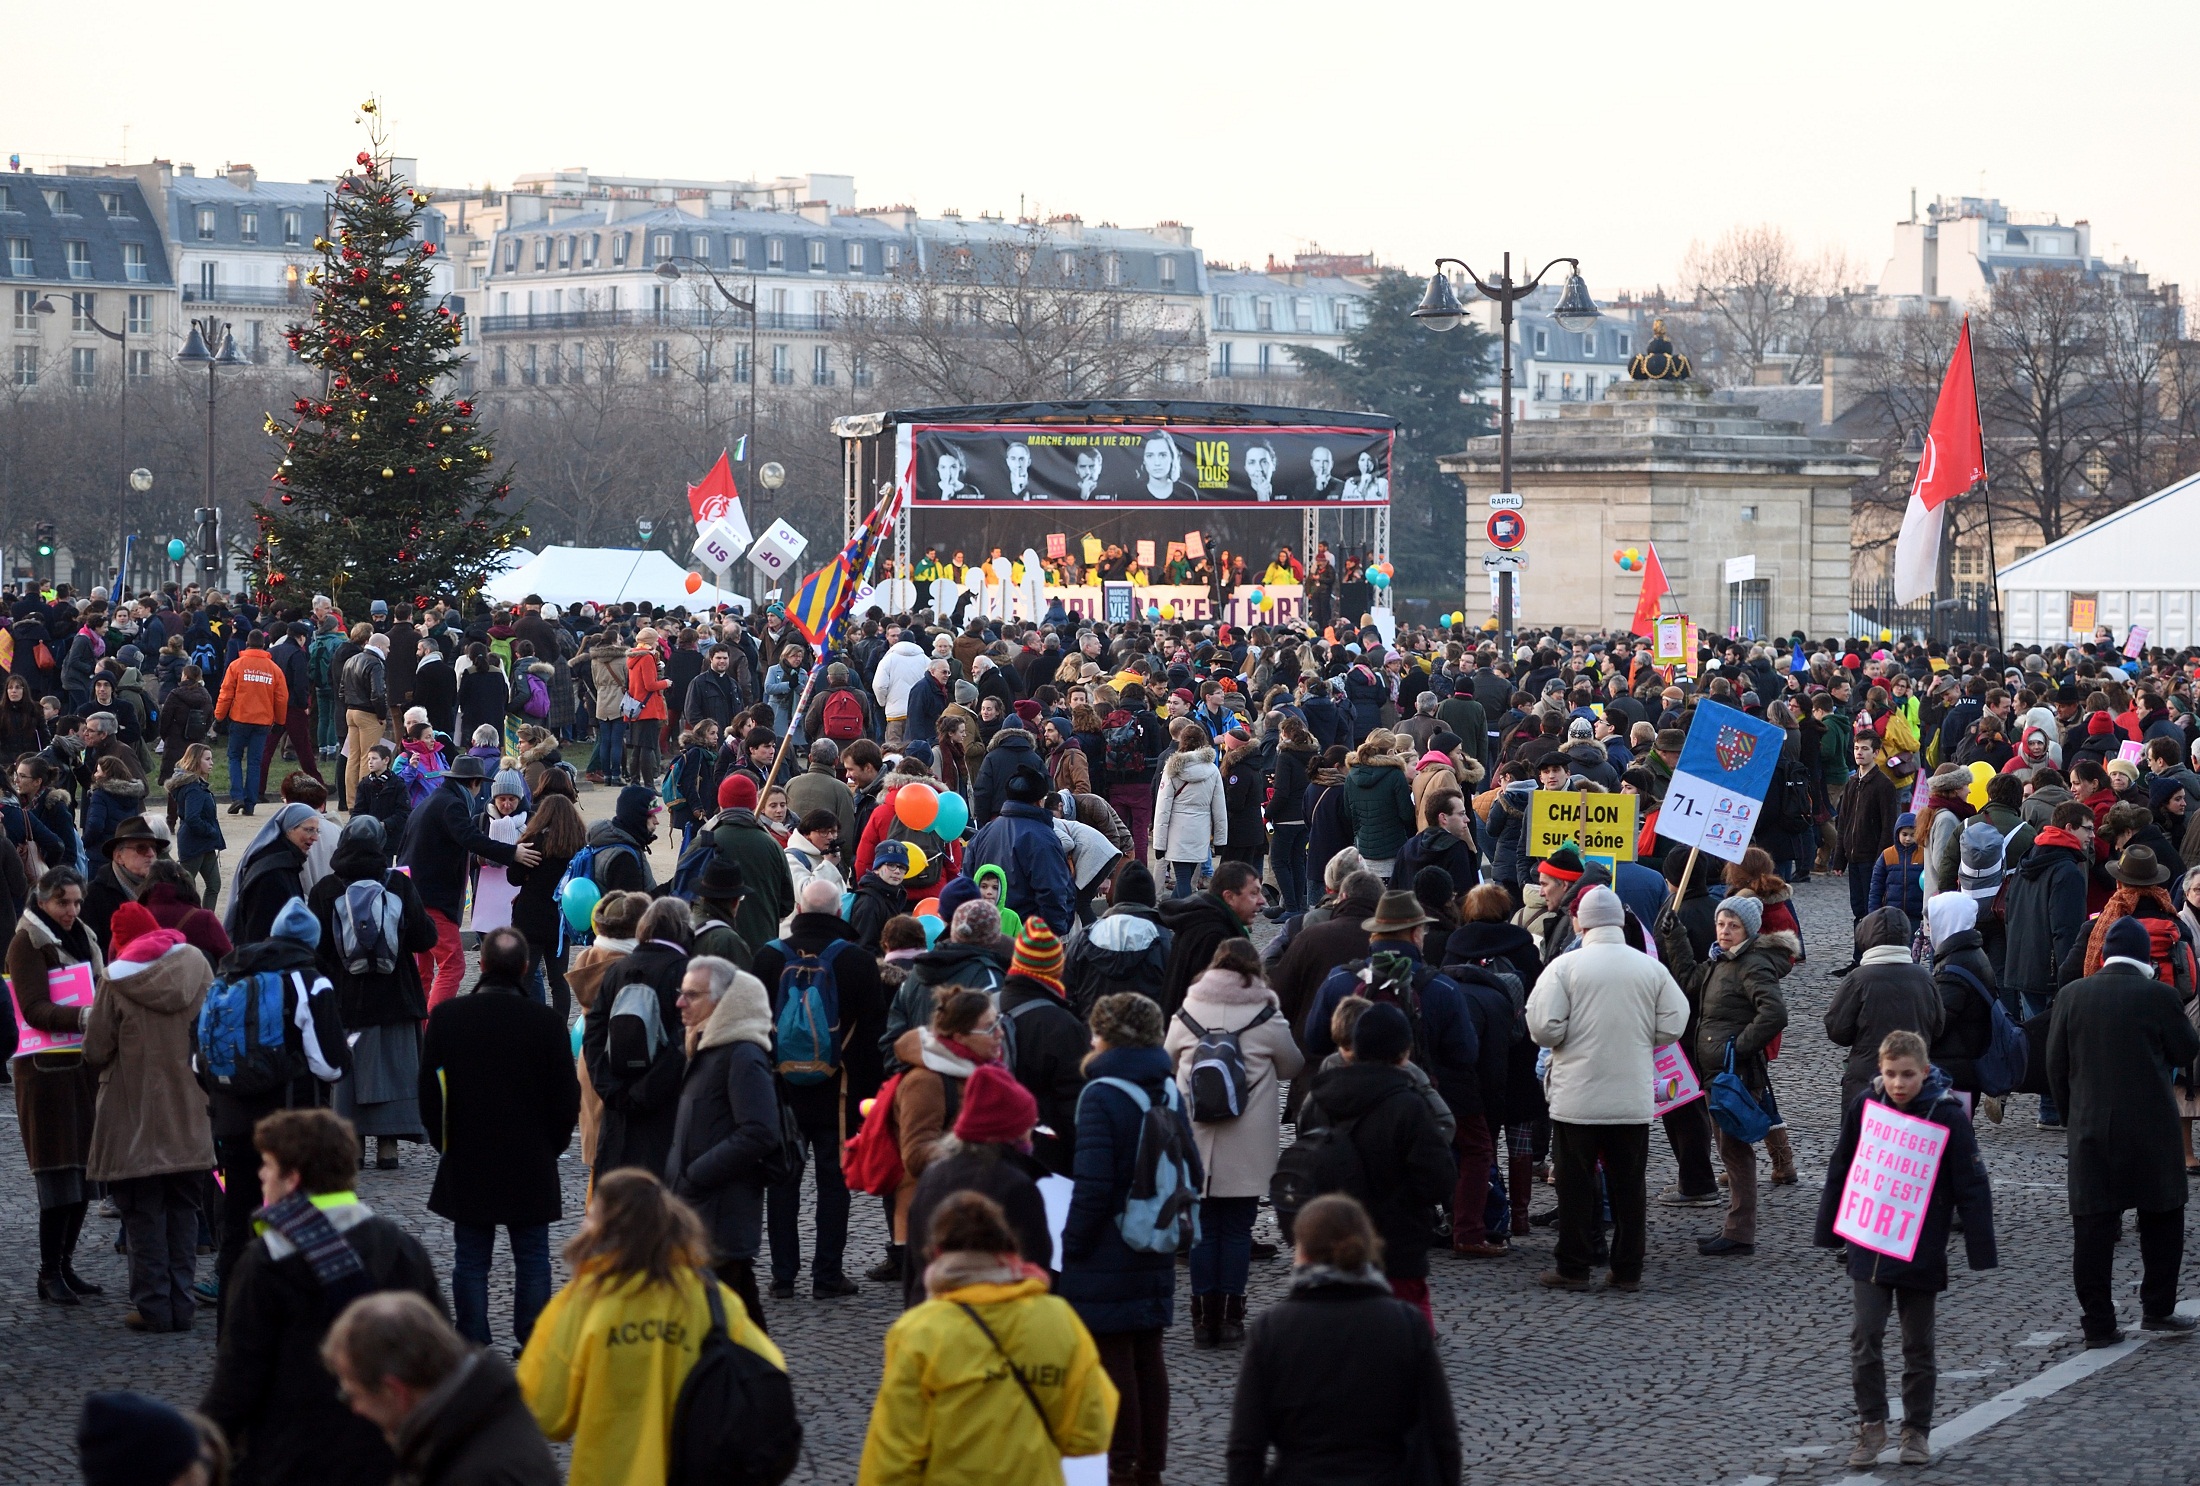 People take part in a march to protest against abortion, in Paris, on January 22, 2017. Tens of thousands of protesters took to the streets of Paris on January 22, 2017 against abortion and a bill to ban pro-life websites from spreading "false information" on ending pregnancies. The demonstration comes just months before France elects a new president, with rightwing Francois Fillon -- who says he is "personally" opposed to abortion but won't seek to make it illegal -- tipped to win.  / AFP PHOTO / Eric FEFERBERG